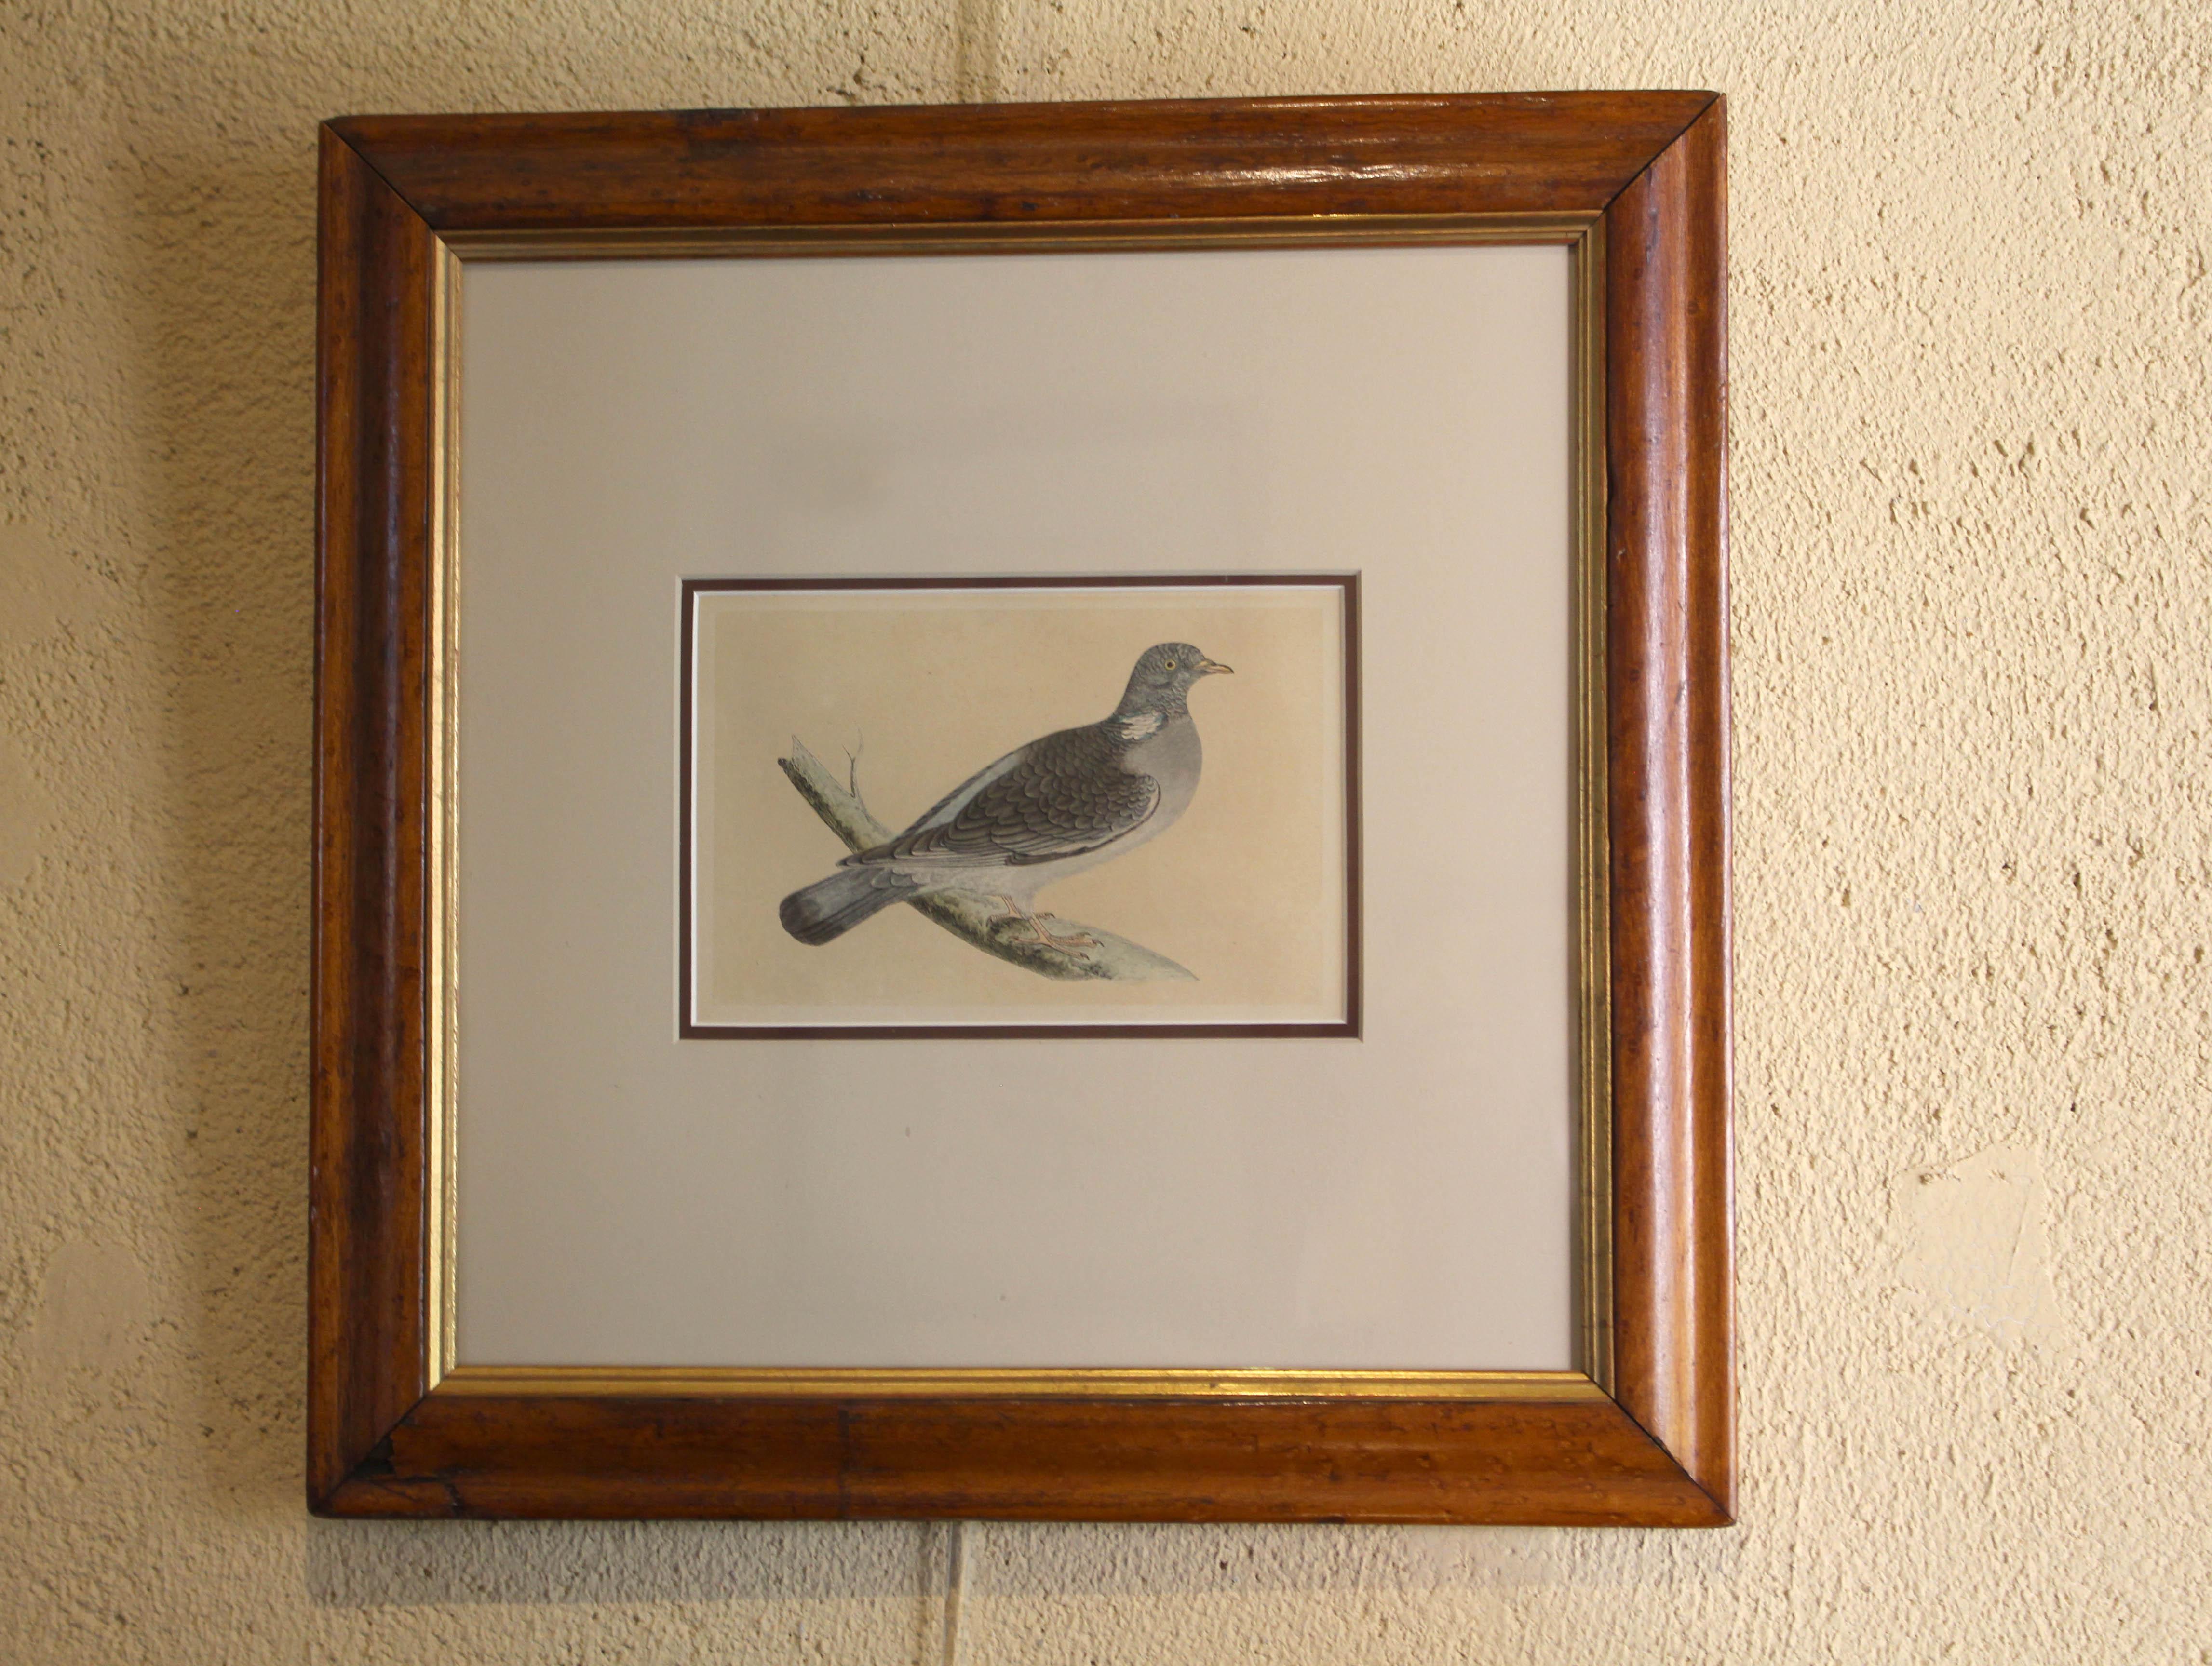 Mid-late 19th century hand-colored lithograph of the Wood Pigeon. It is from the Rev. F.O. Morris' 